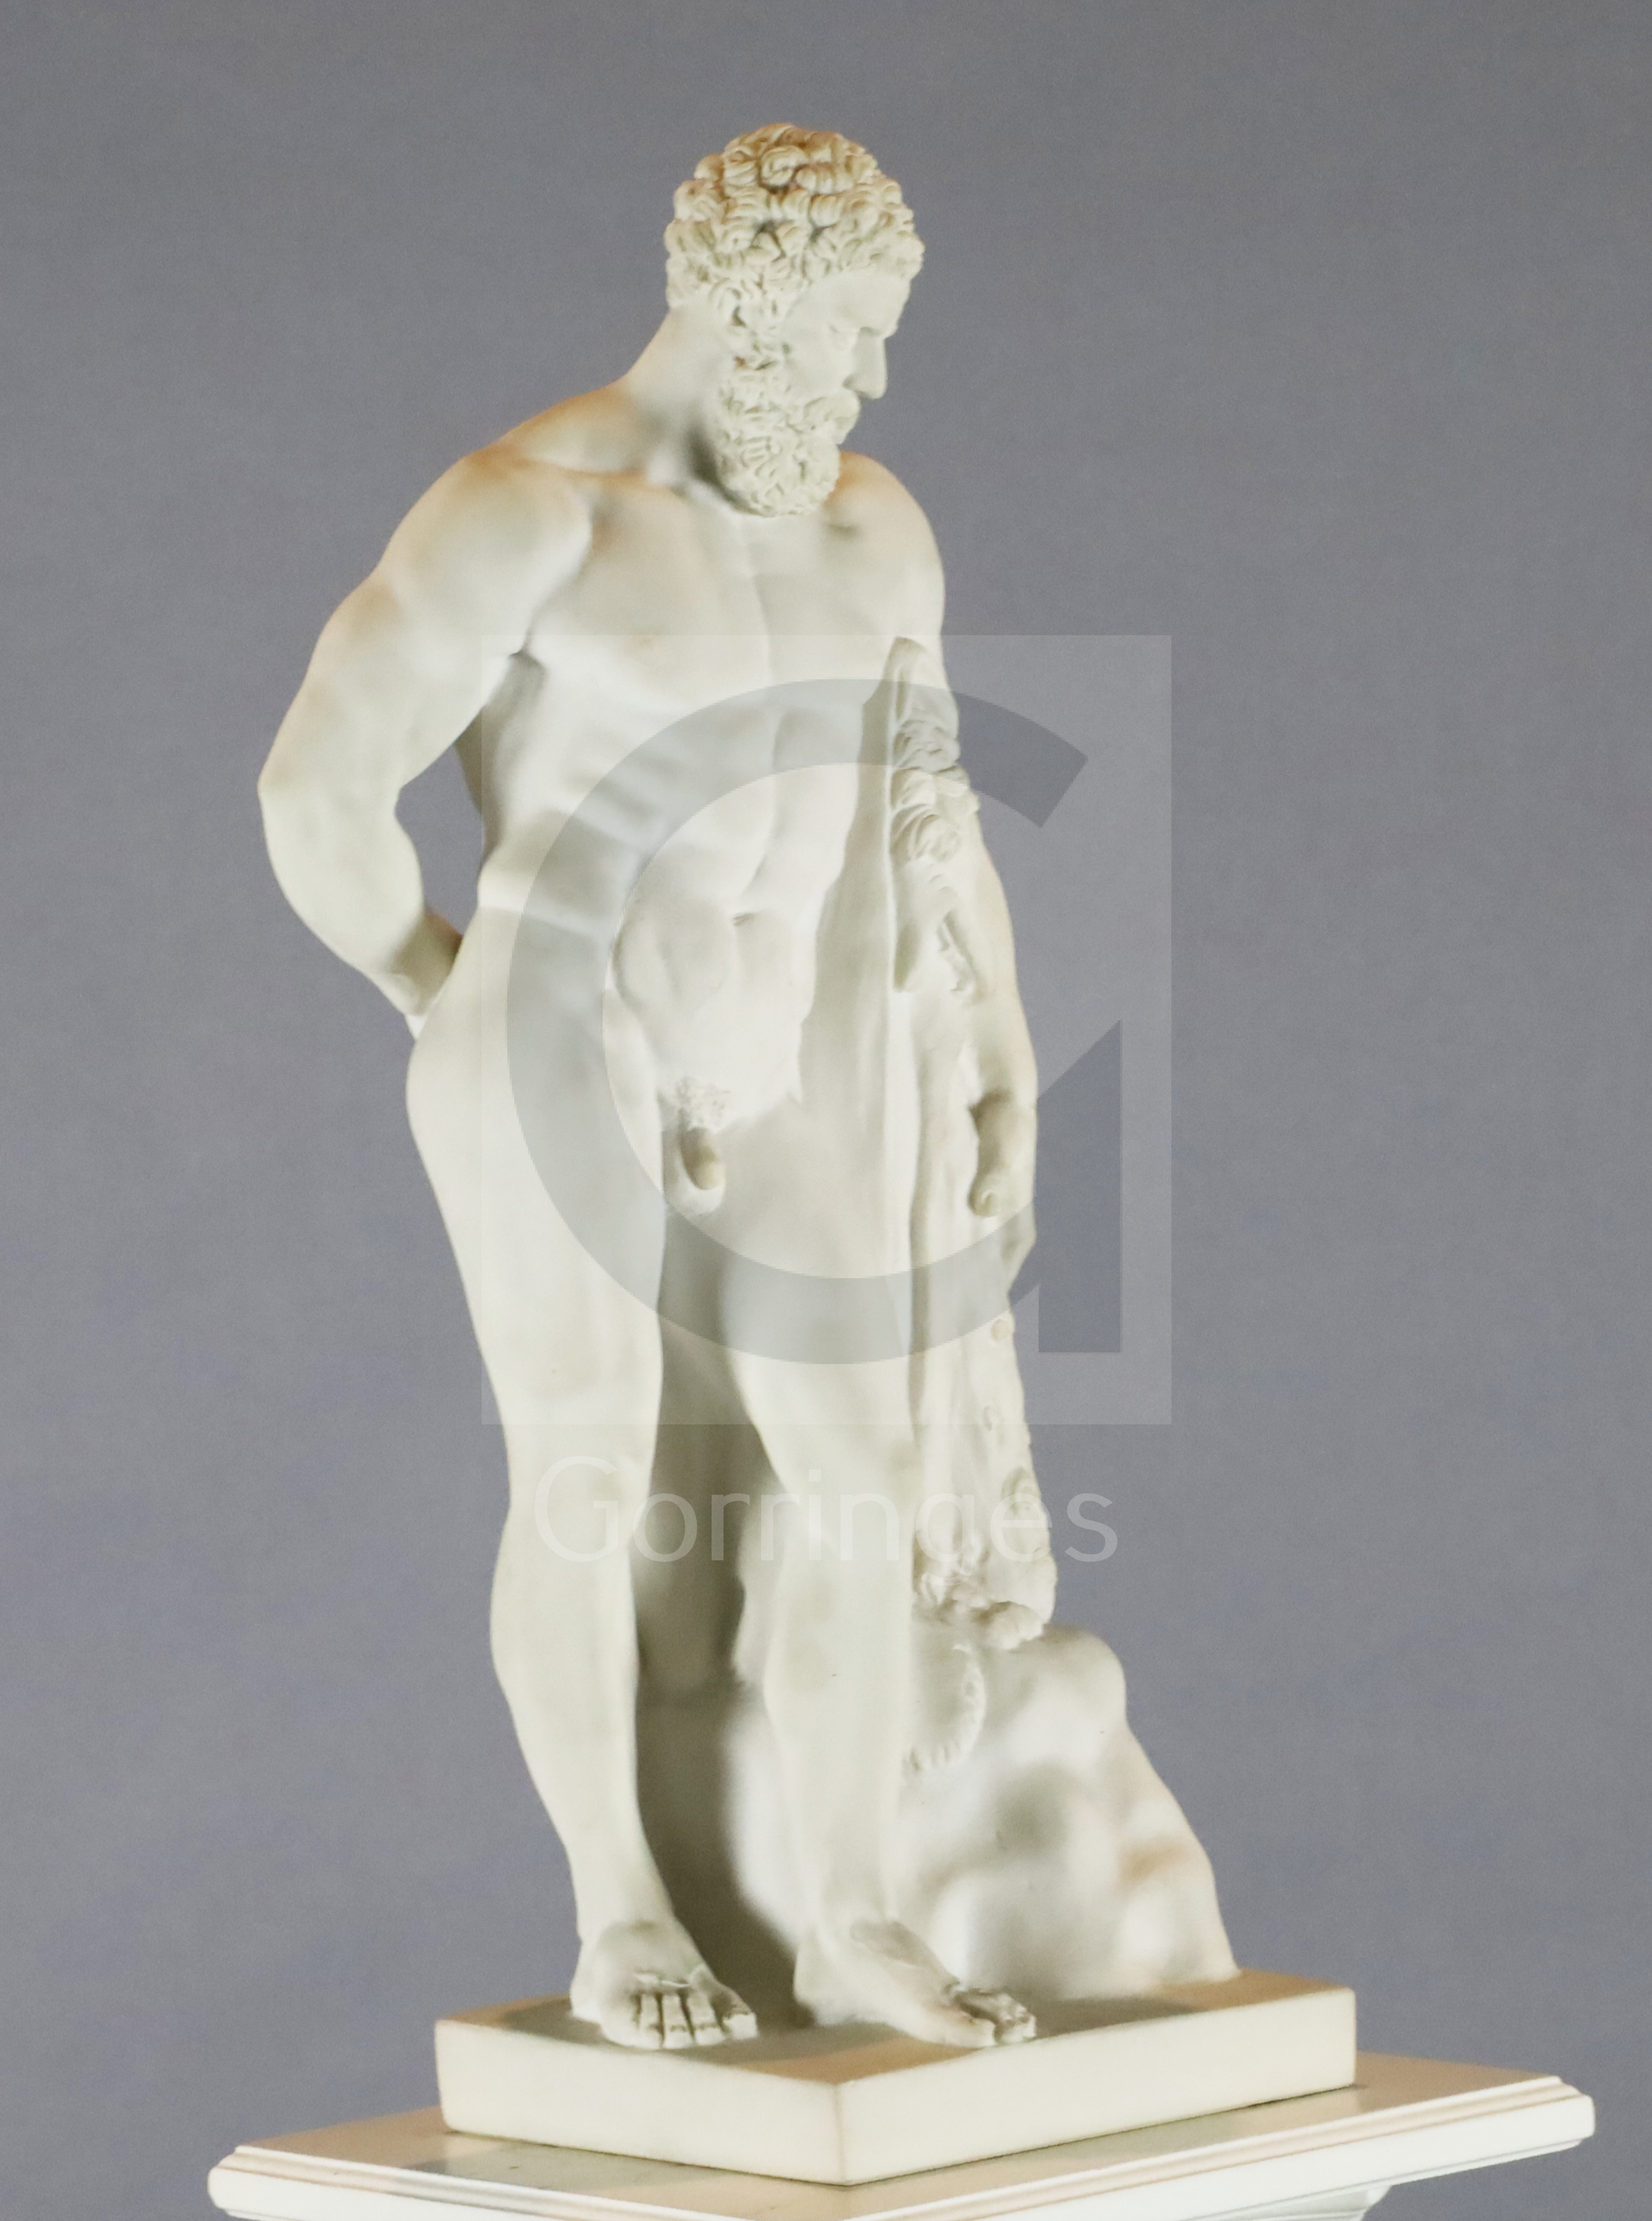 Italian, after the antique, the Farnese Hercules, composite white marble statue, 1ft. 10in. raised - Image 2 of 2